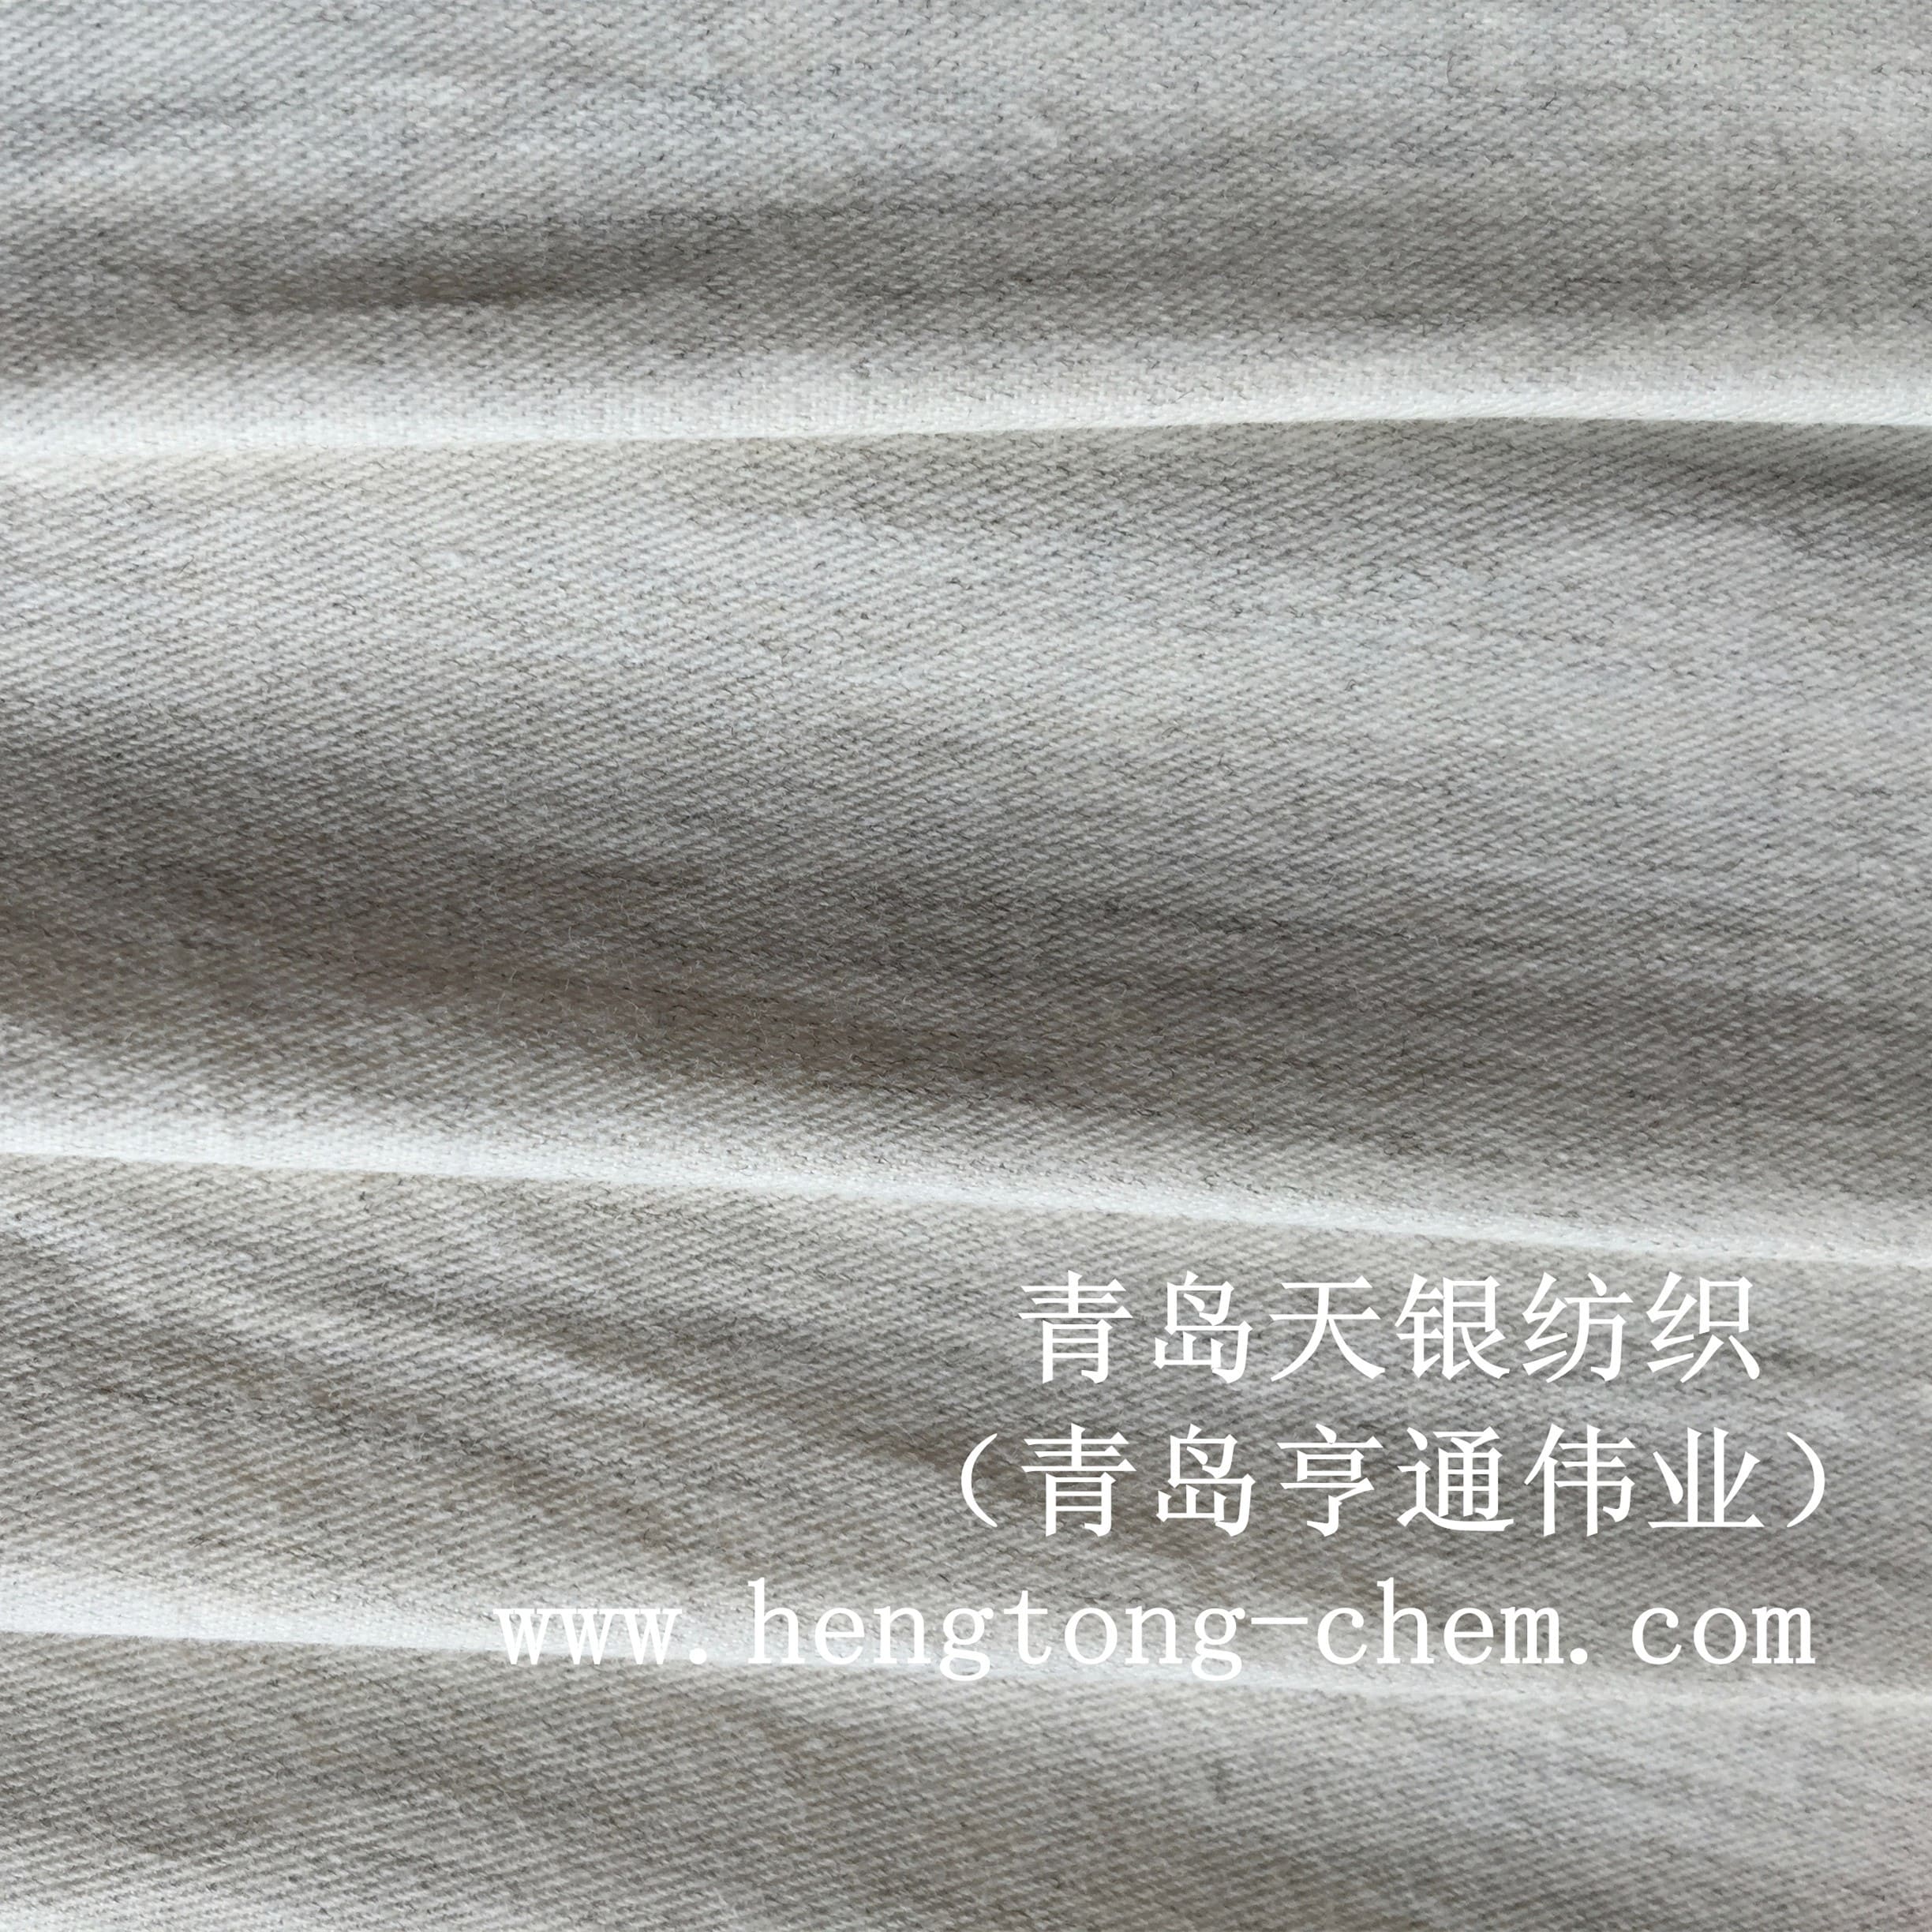 Silver staple and cotton blended bed sheet fabric with antibacterial cotton